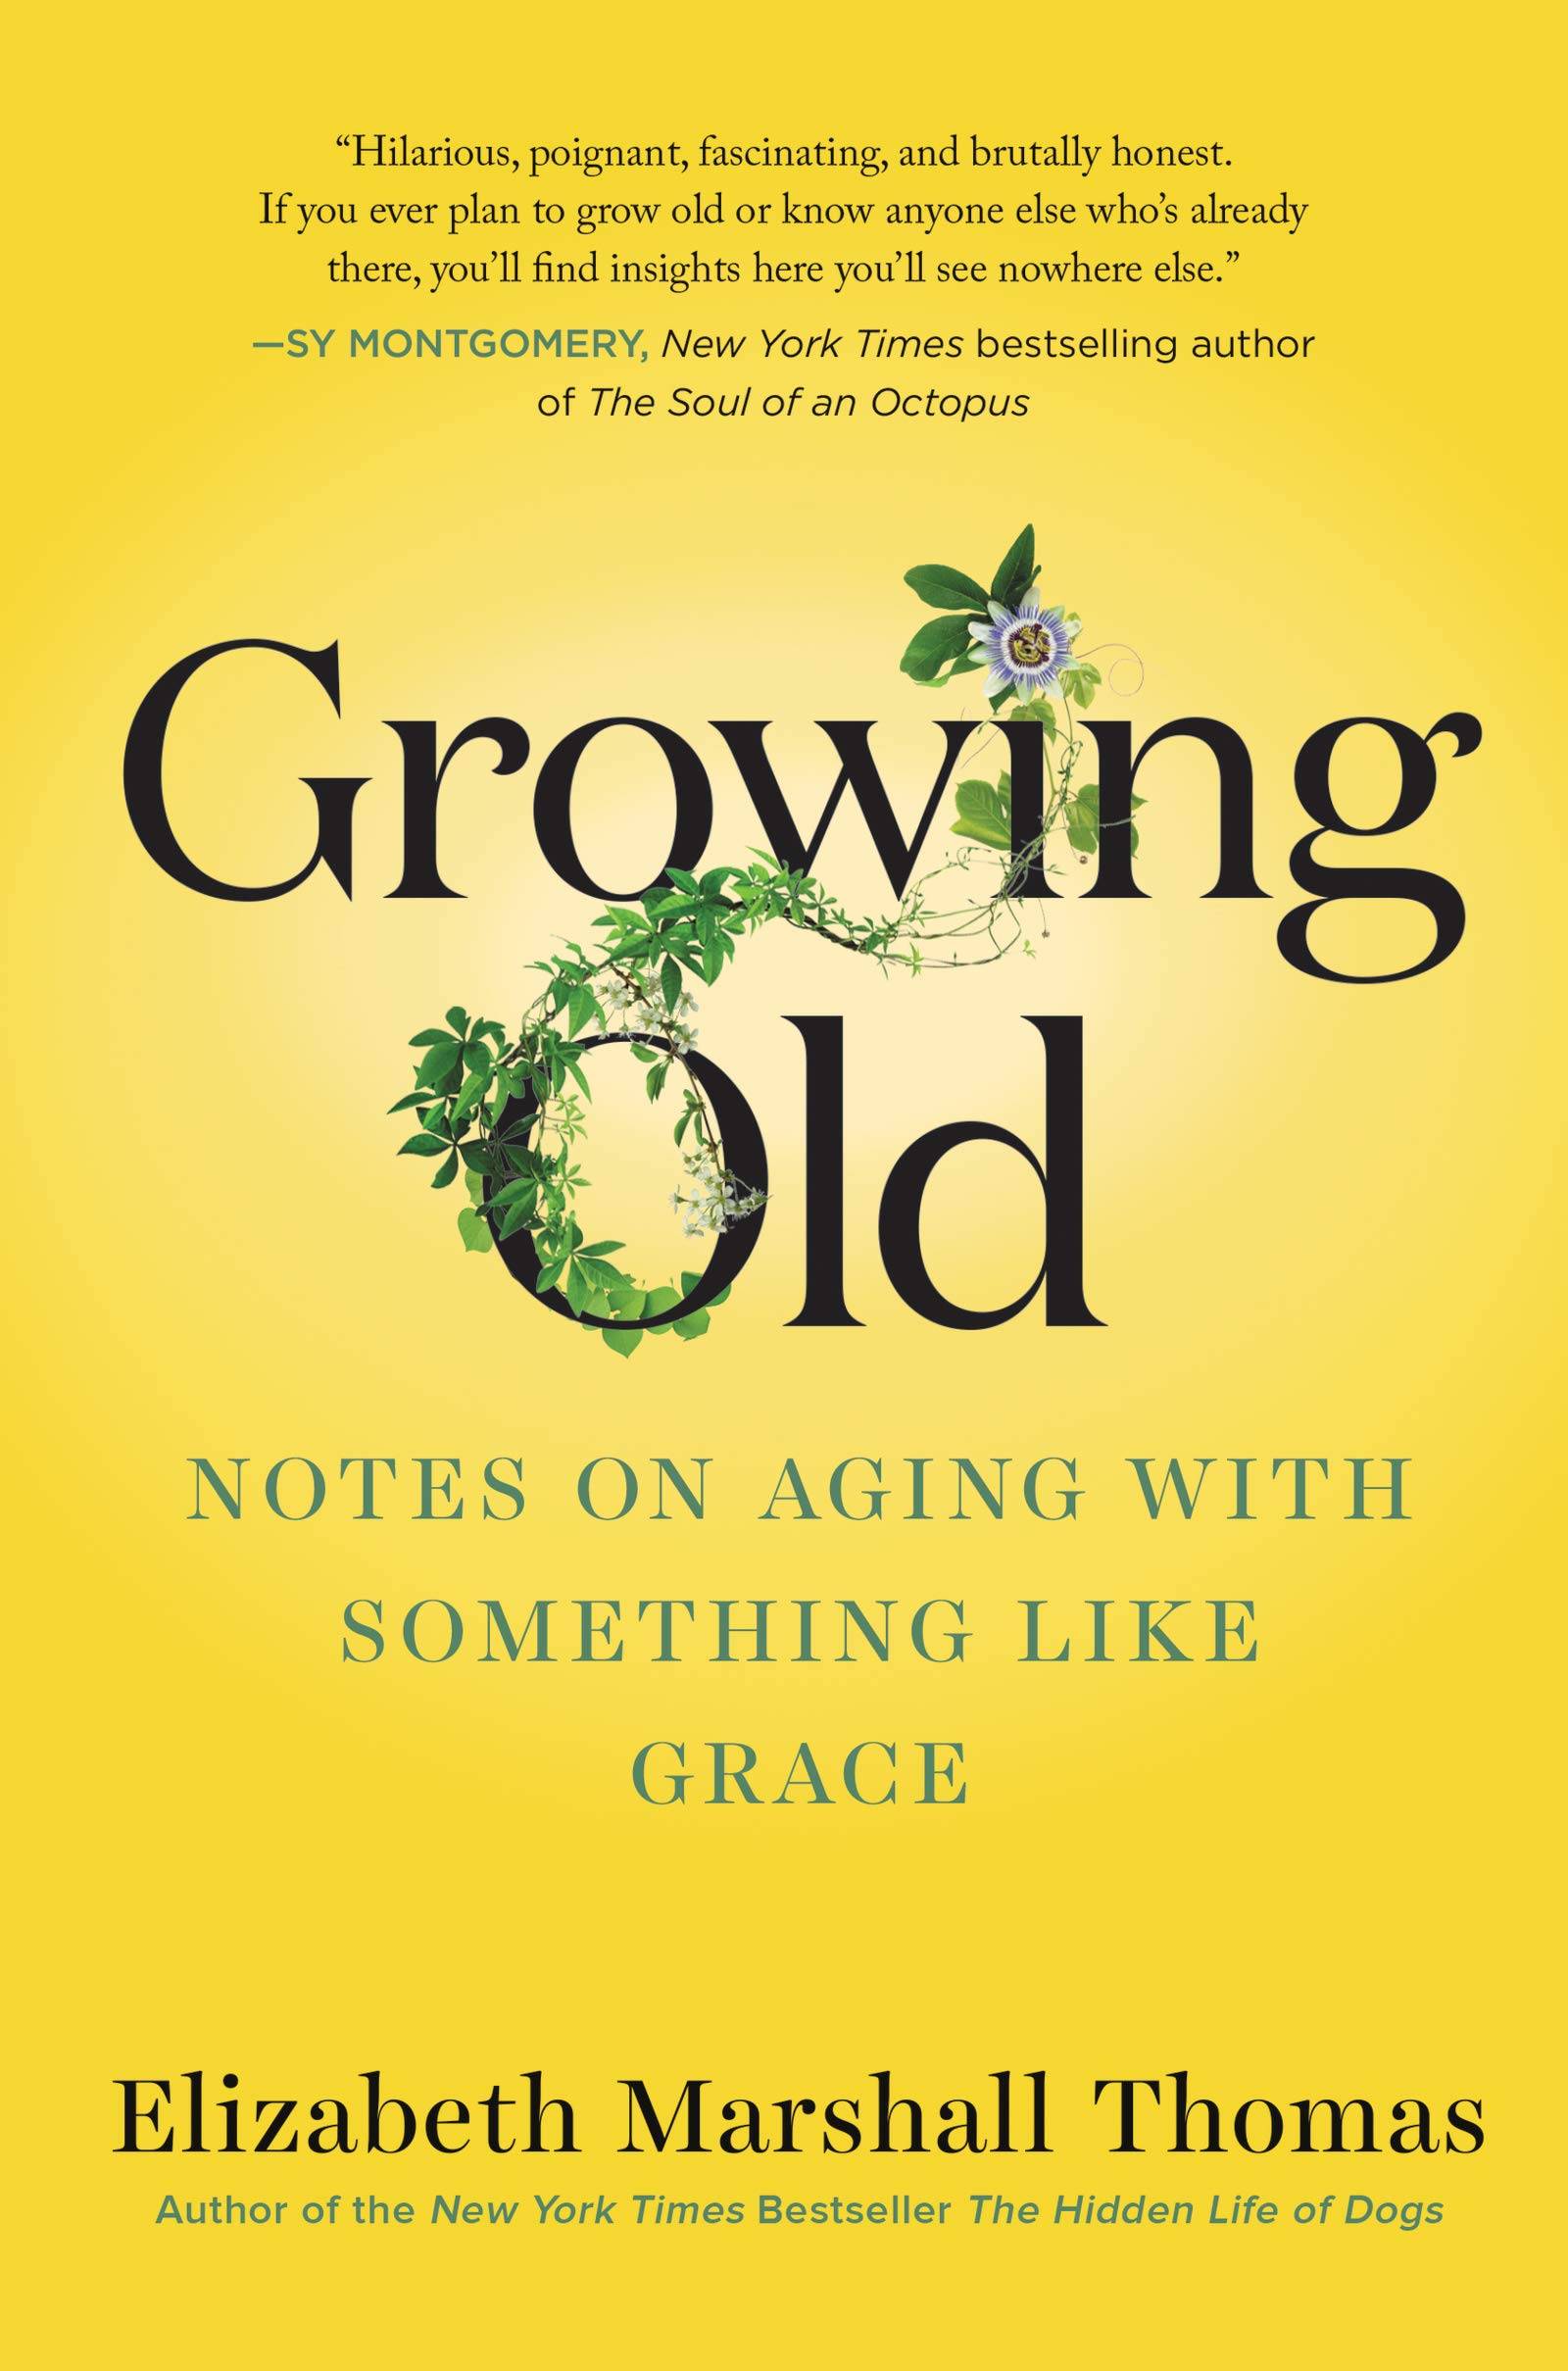 Image for "Growing Old"